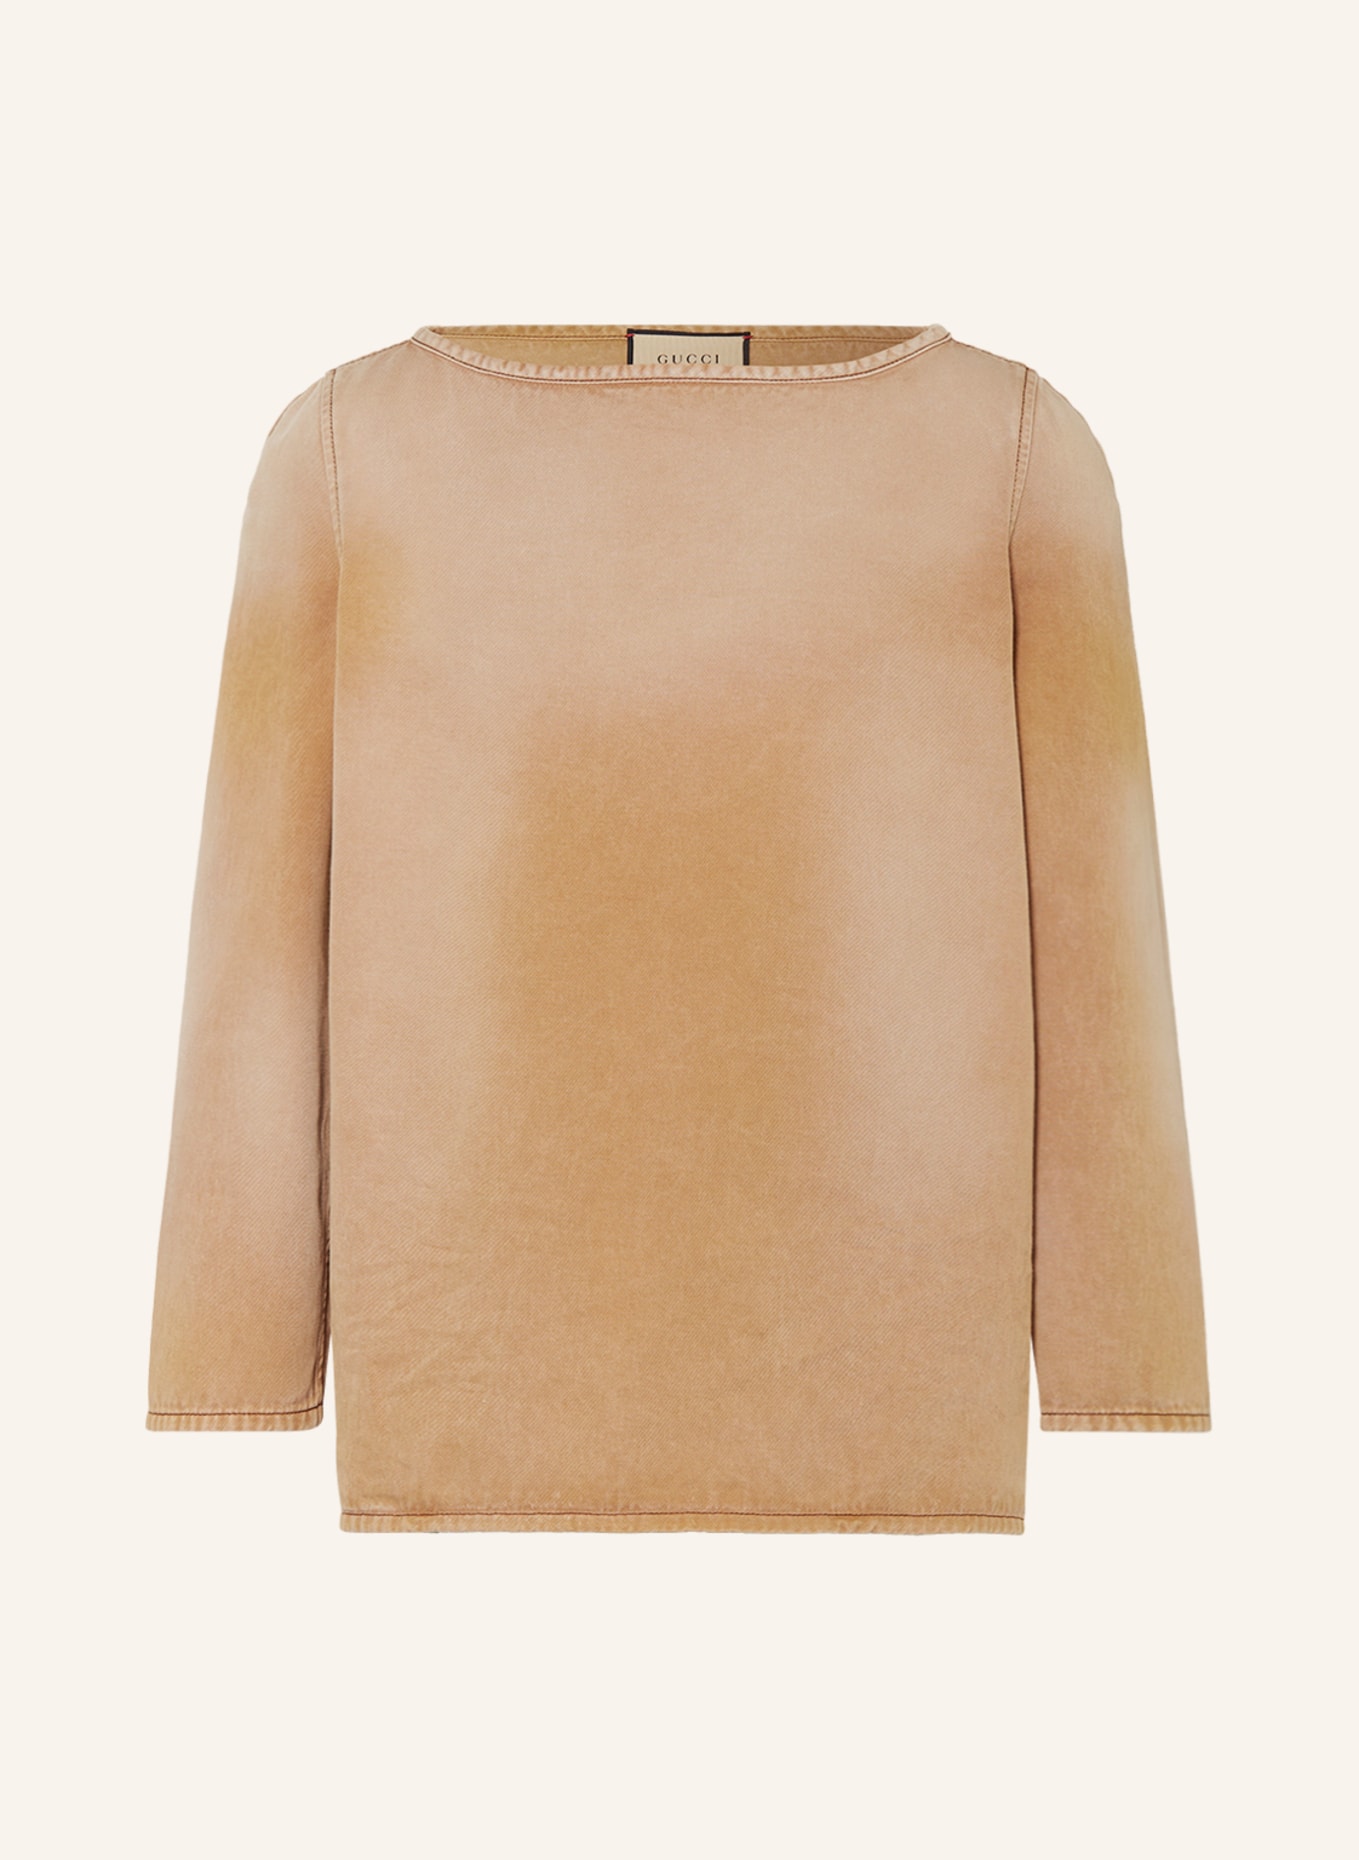 GUCCI Long sleeve shirt, Color: BEIGE (Image 1)